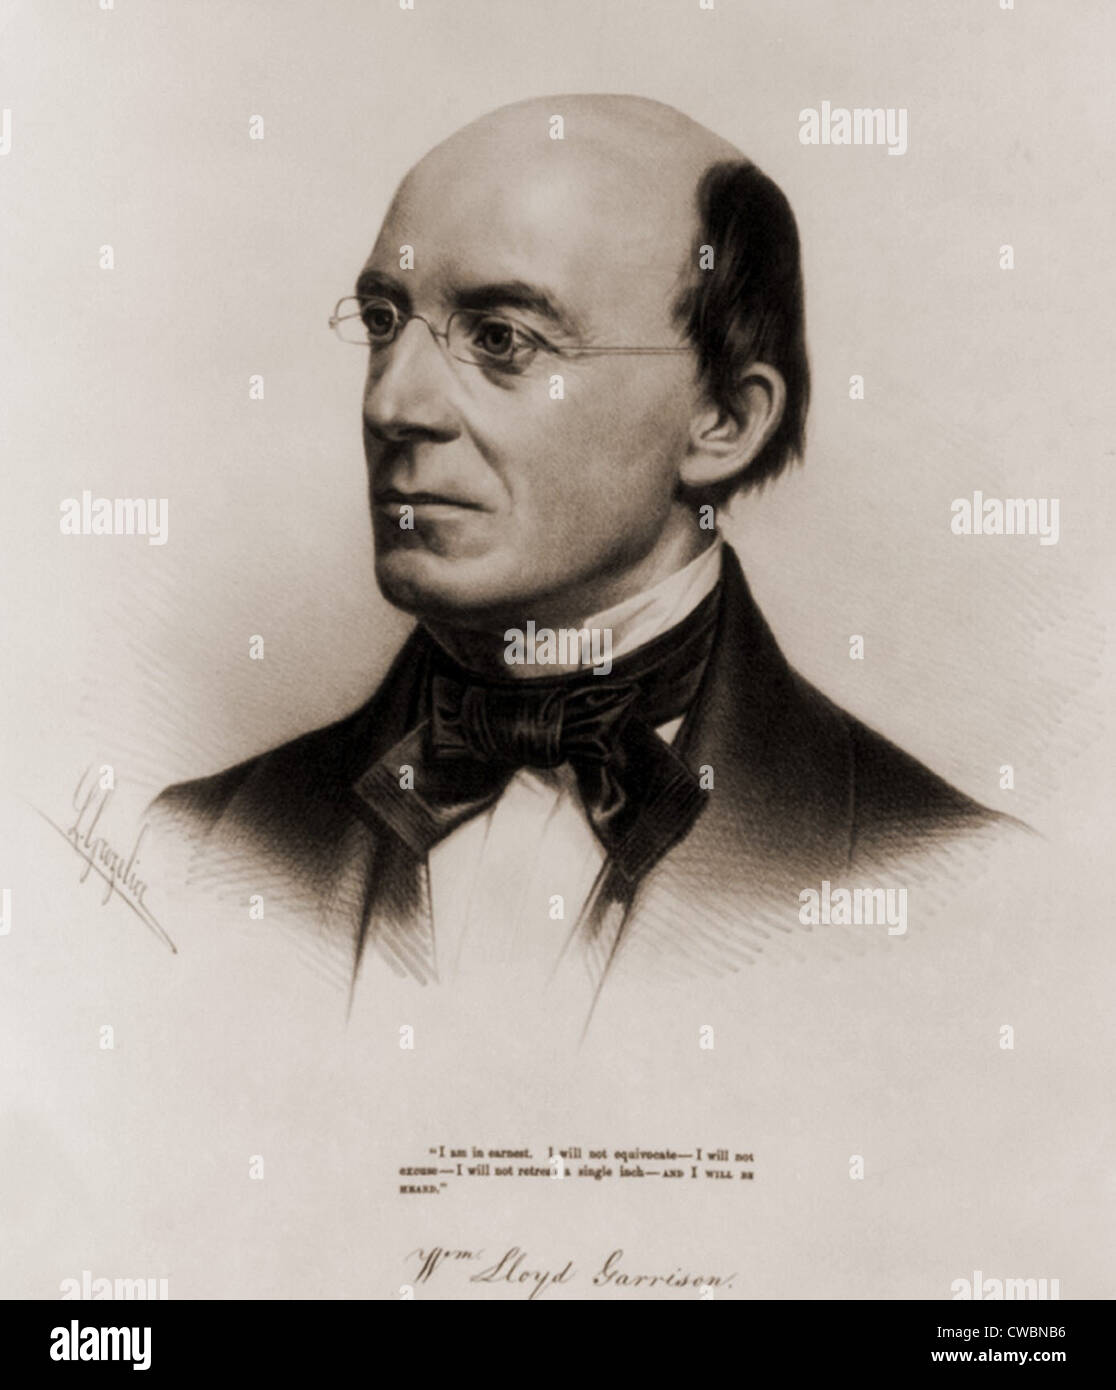 William Lloyd Garrison (1805-1879) joined the Abolitionist movement at age 25. In 1830, he founded THE LIBERATOR, an Stock Photo